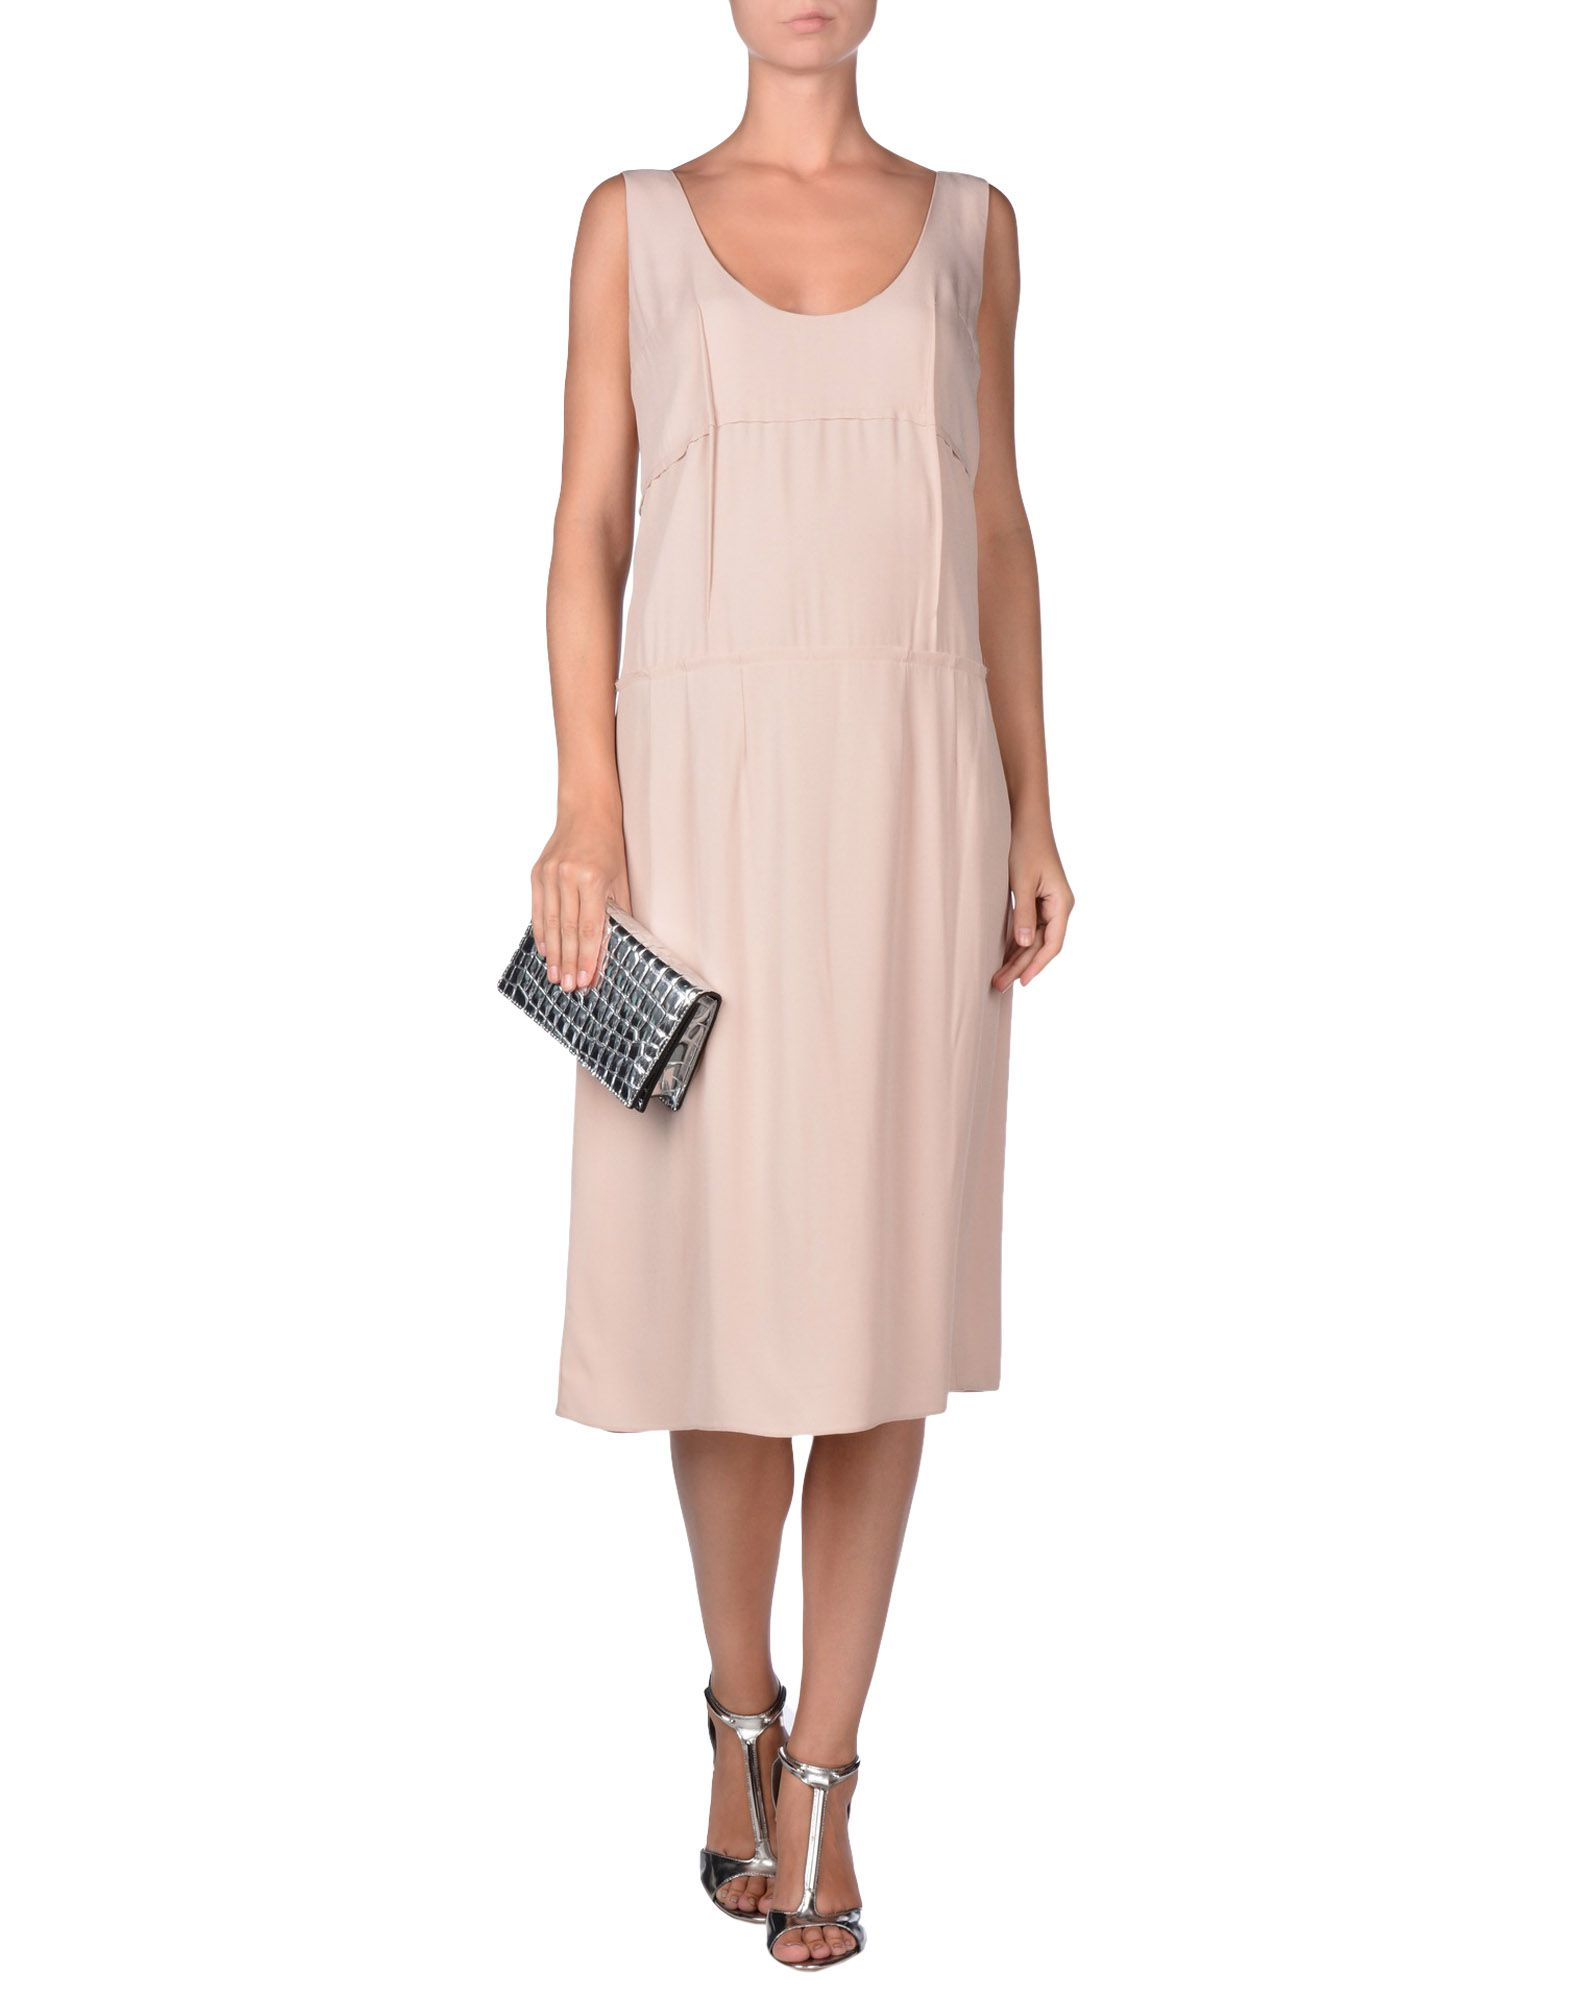 Lyst - Marni Knee-length Dress in Pink